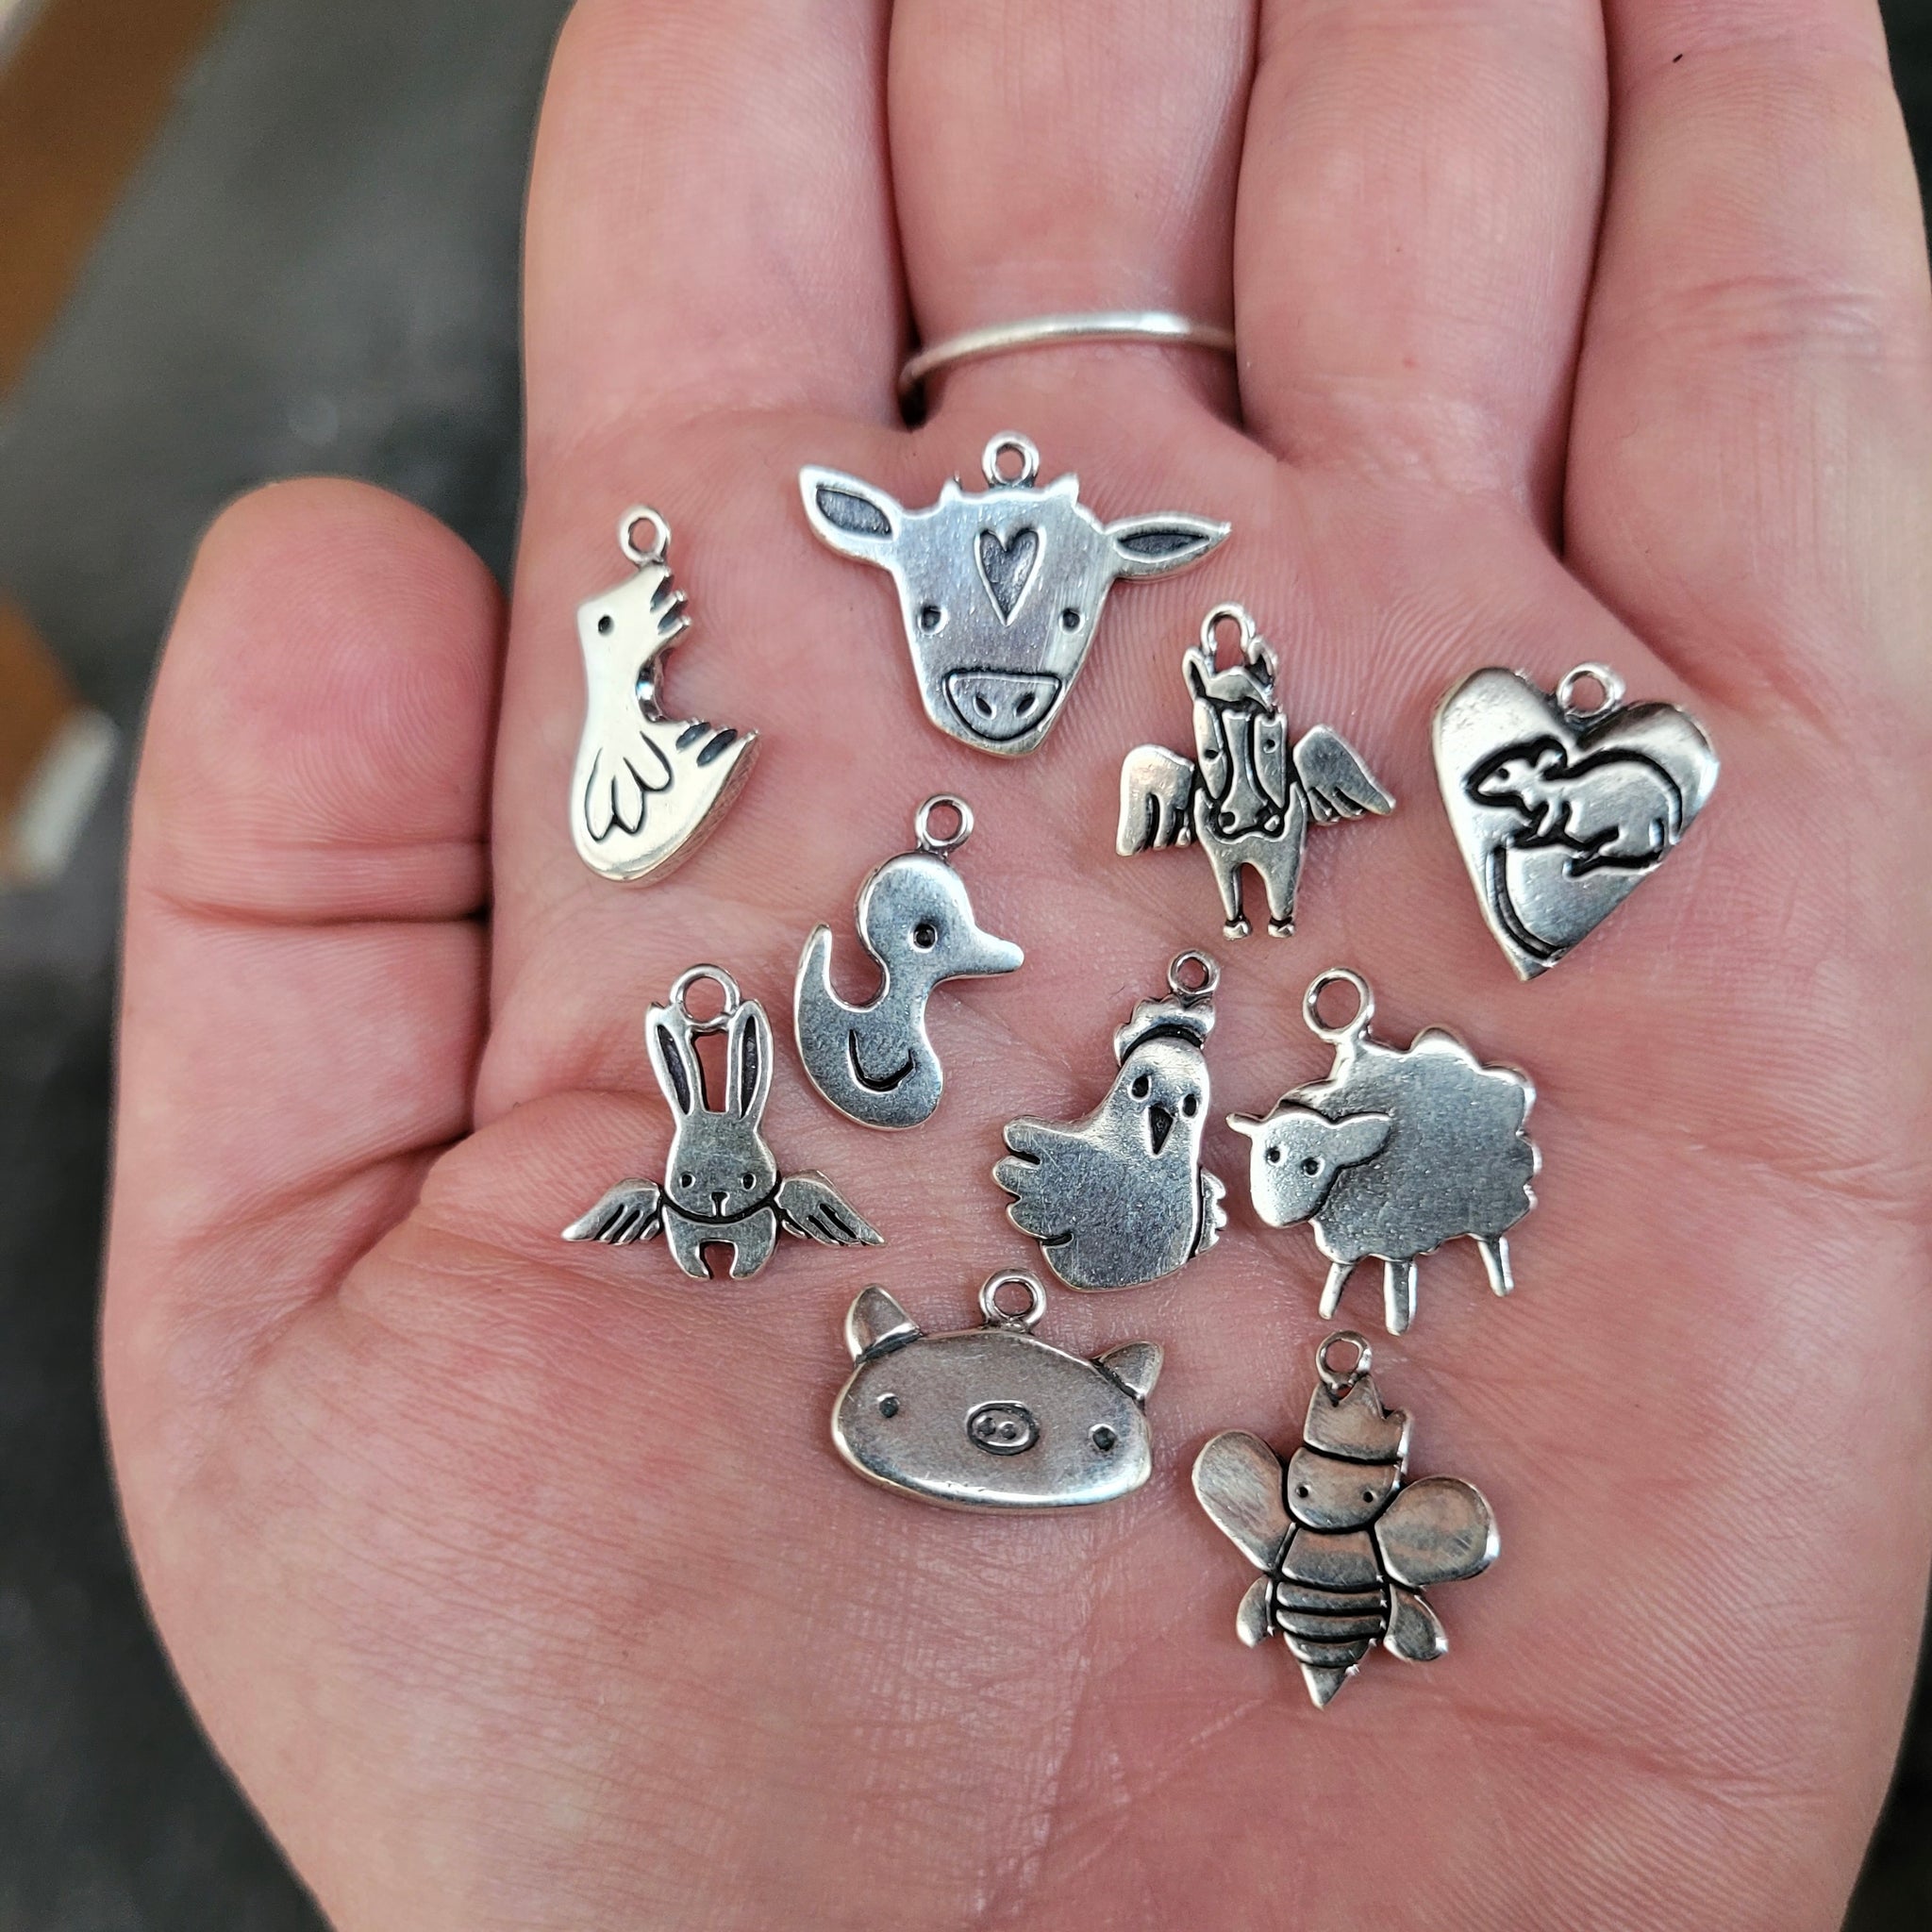 Farm Animal Charm - Choose Your Sterling Silver Charm to Add to Bracelet Cluck Cluck